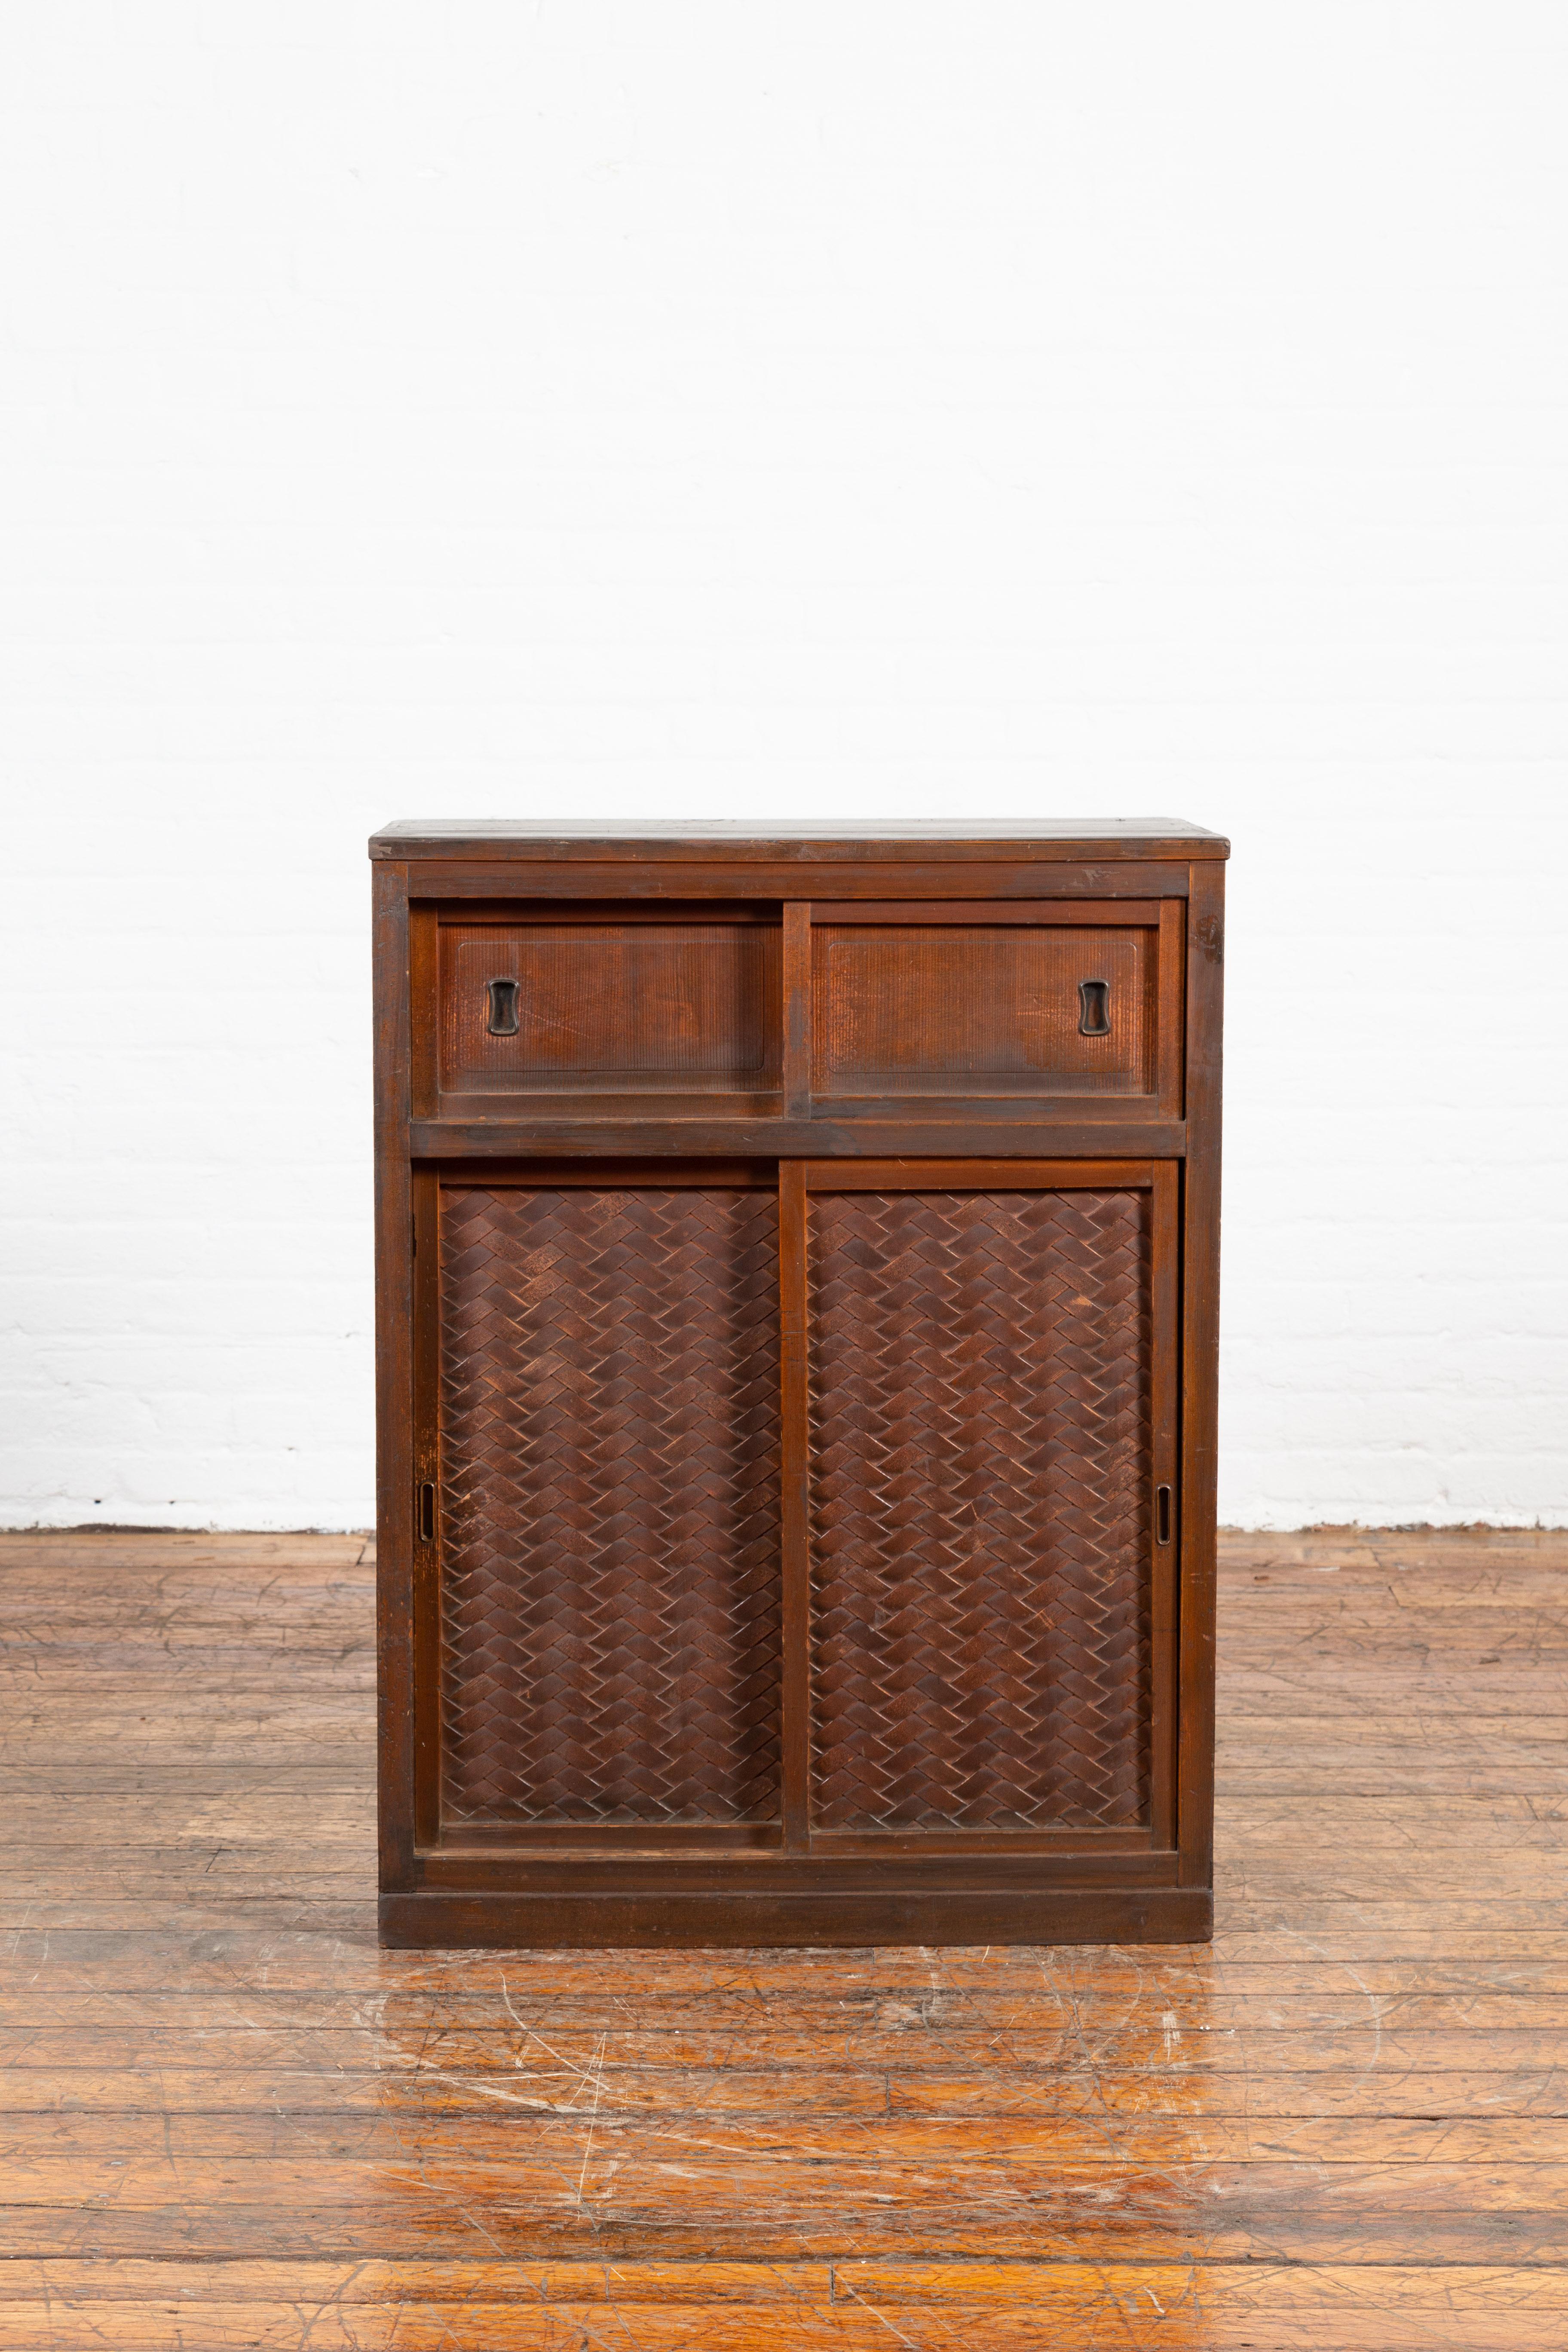 A Japanese antique cabinet from the 19th century, with woven criss-cross design, sliding doors and hidden drawers. Created in Japan during the 19th century, this cabinet features a rectangular top sitting above two narrow sliding panels. It is the